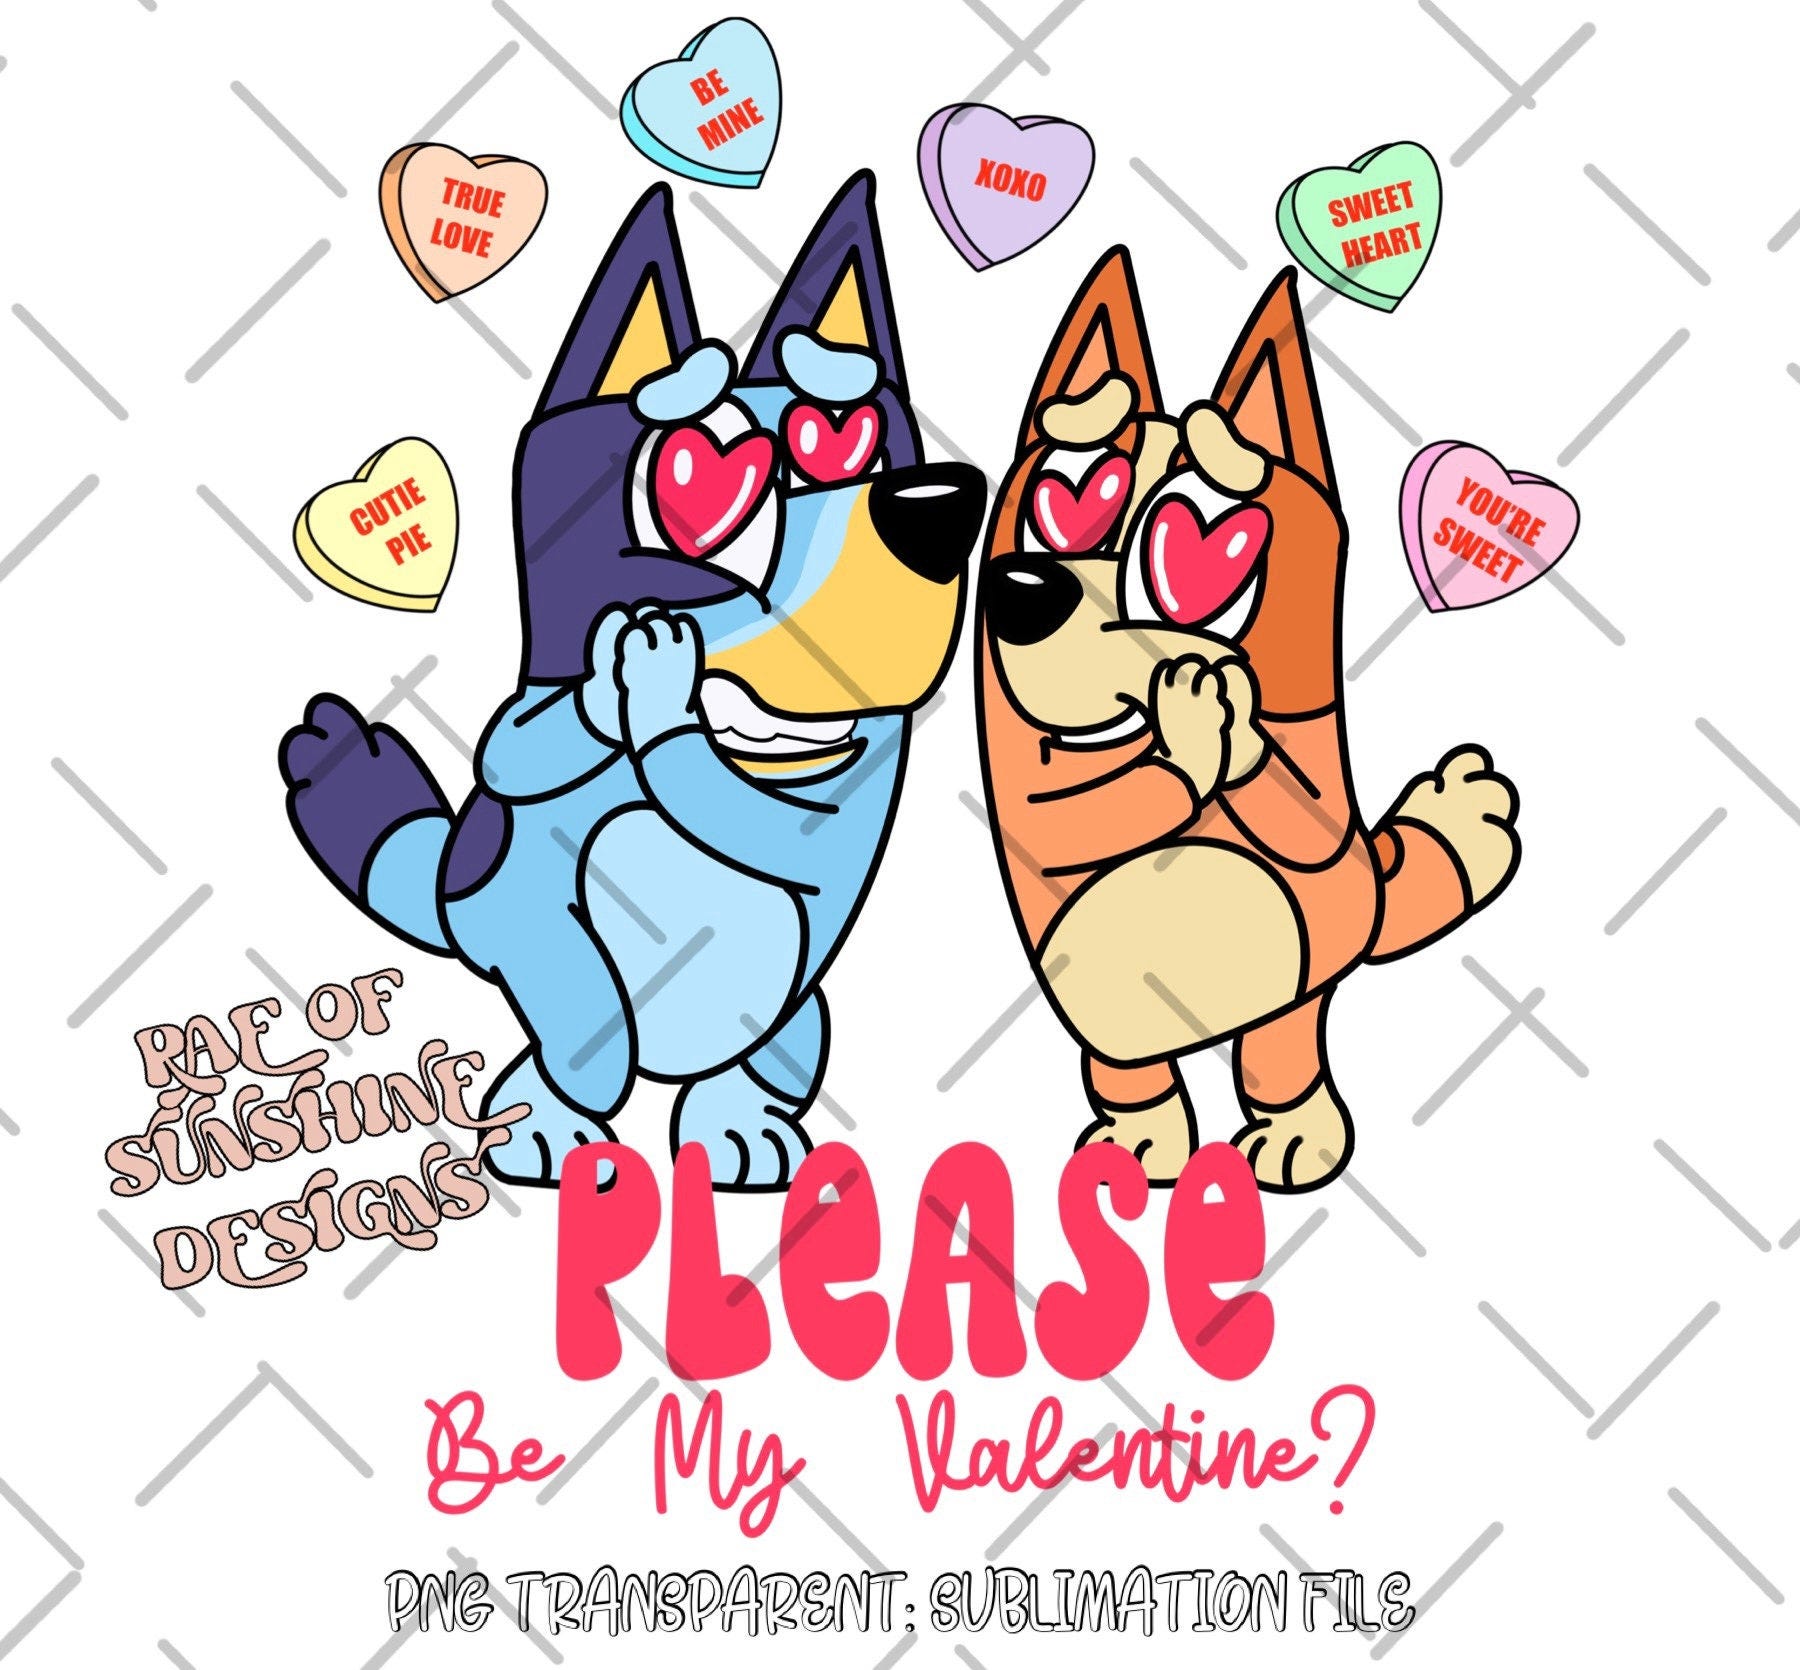 Bluey and Bingo Valentine, candy hearts, Be Mine,bluey please be my valentine, transparent, png, sublimation logo, clipart, Digital Download